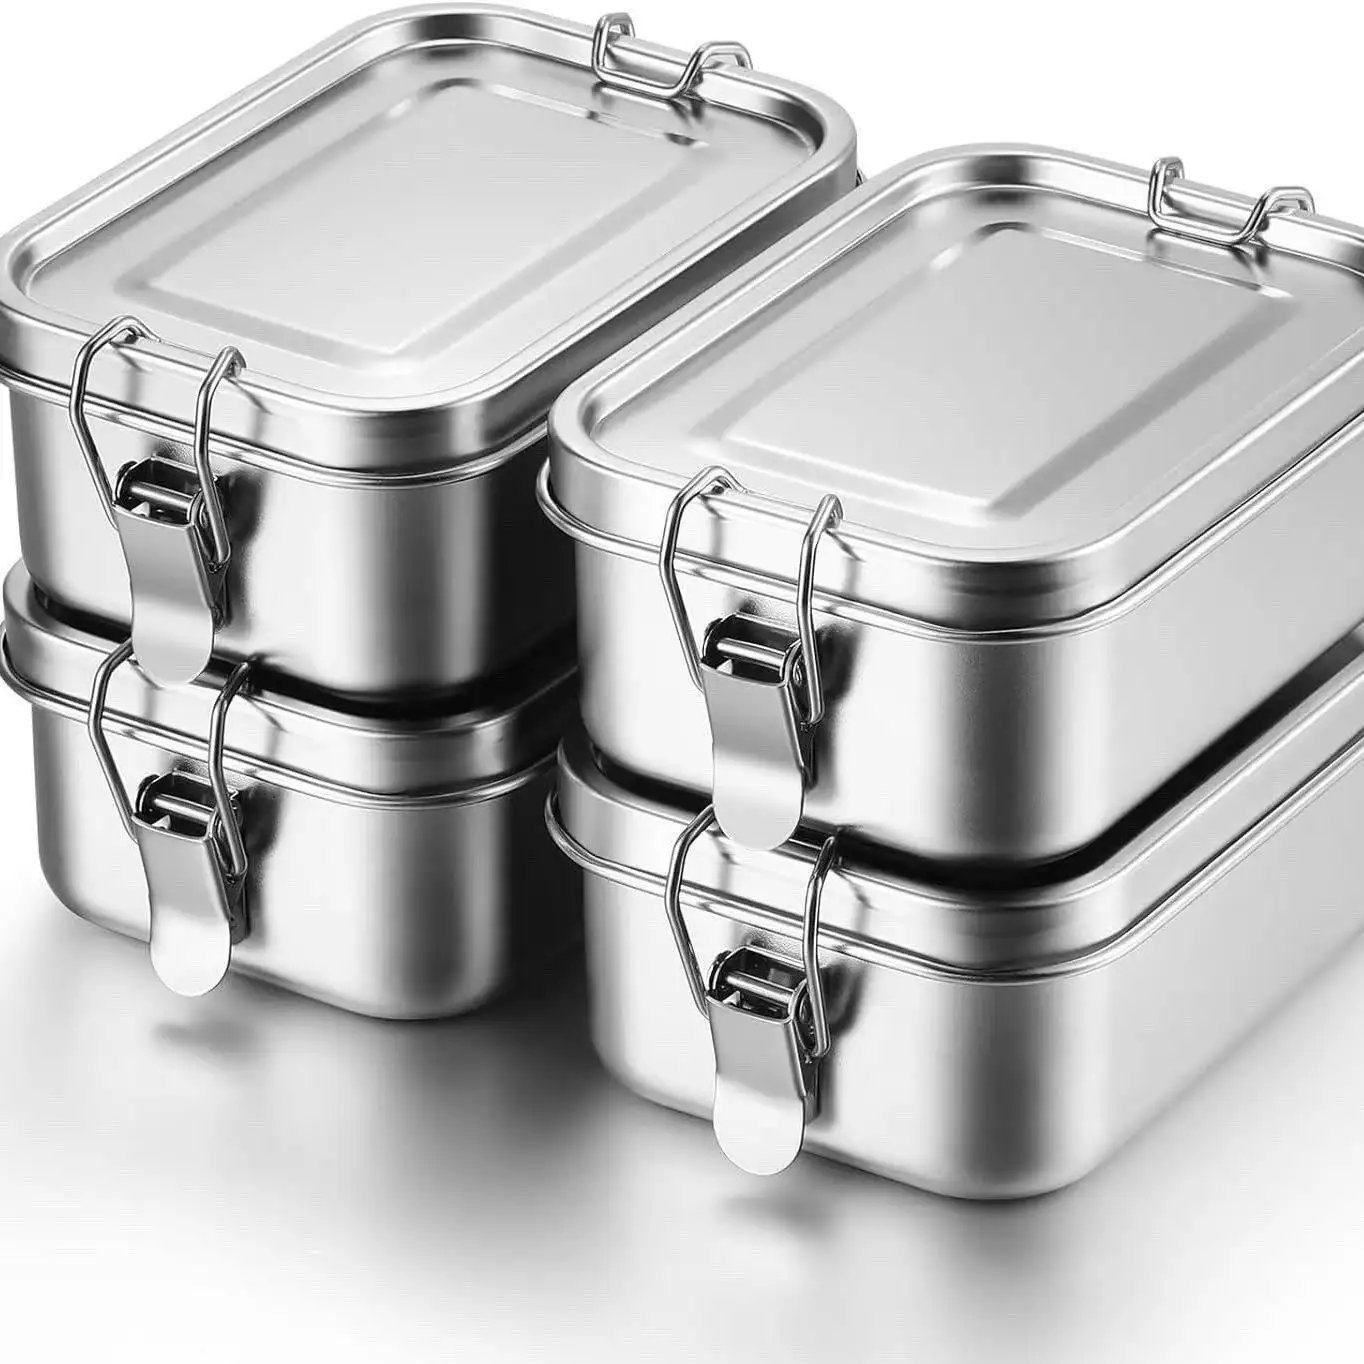 Ailingalaxy Edelstahl-Lunchbox Bento-Container ohne Kompartiment 3 Kompartimente Bento Lunchbox Kid